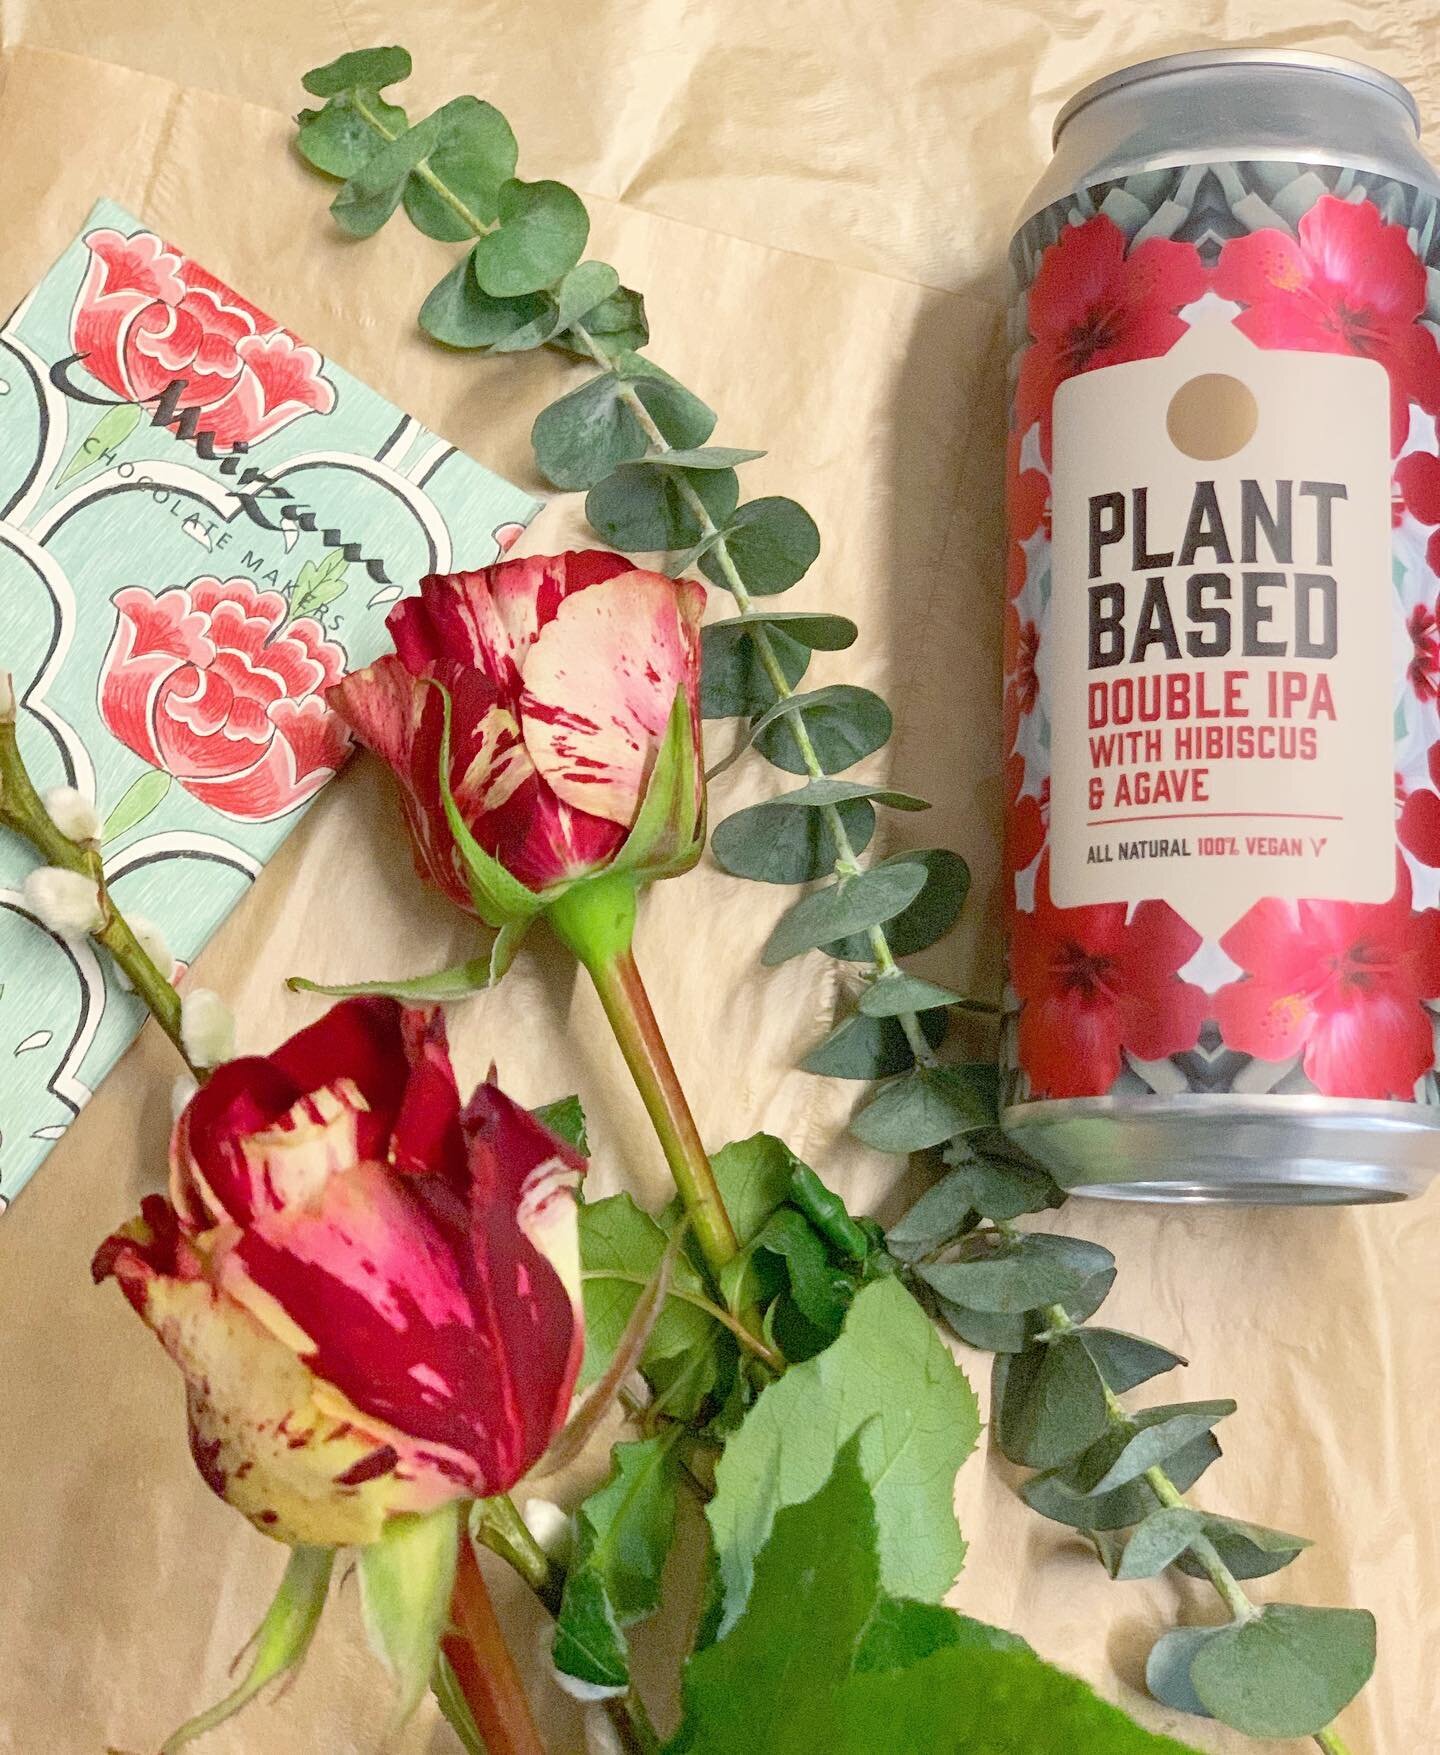 Crushing hard on Mirzam&rsquo;s latest creation, while we crush these new Plant-Based DIPA&rsquo;s from Stillwater!

@mirzamchocolate &lsquo;s Smooth white chocolate sprinkled with chia seeds includes bright green pistachios and crunchy rose candy. F